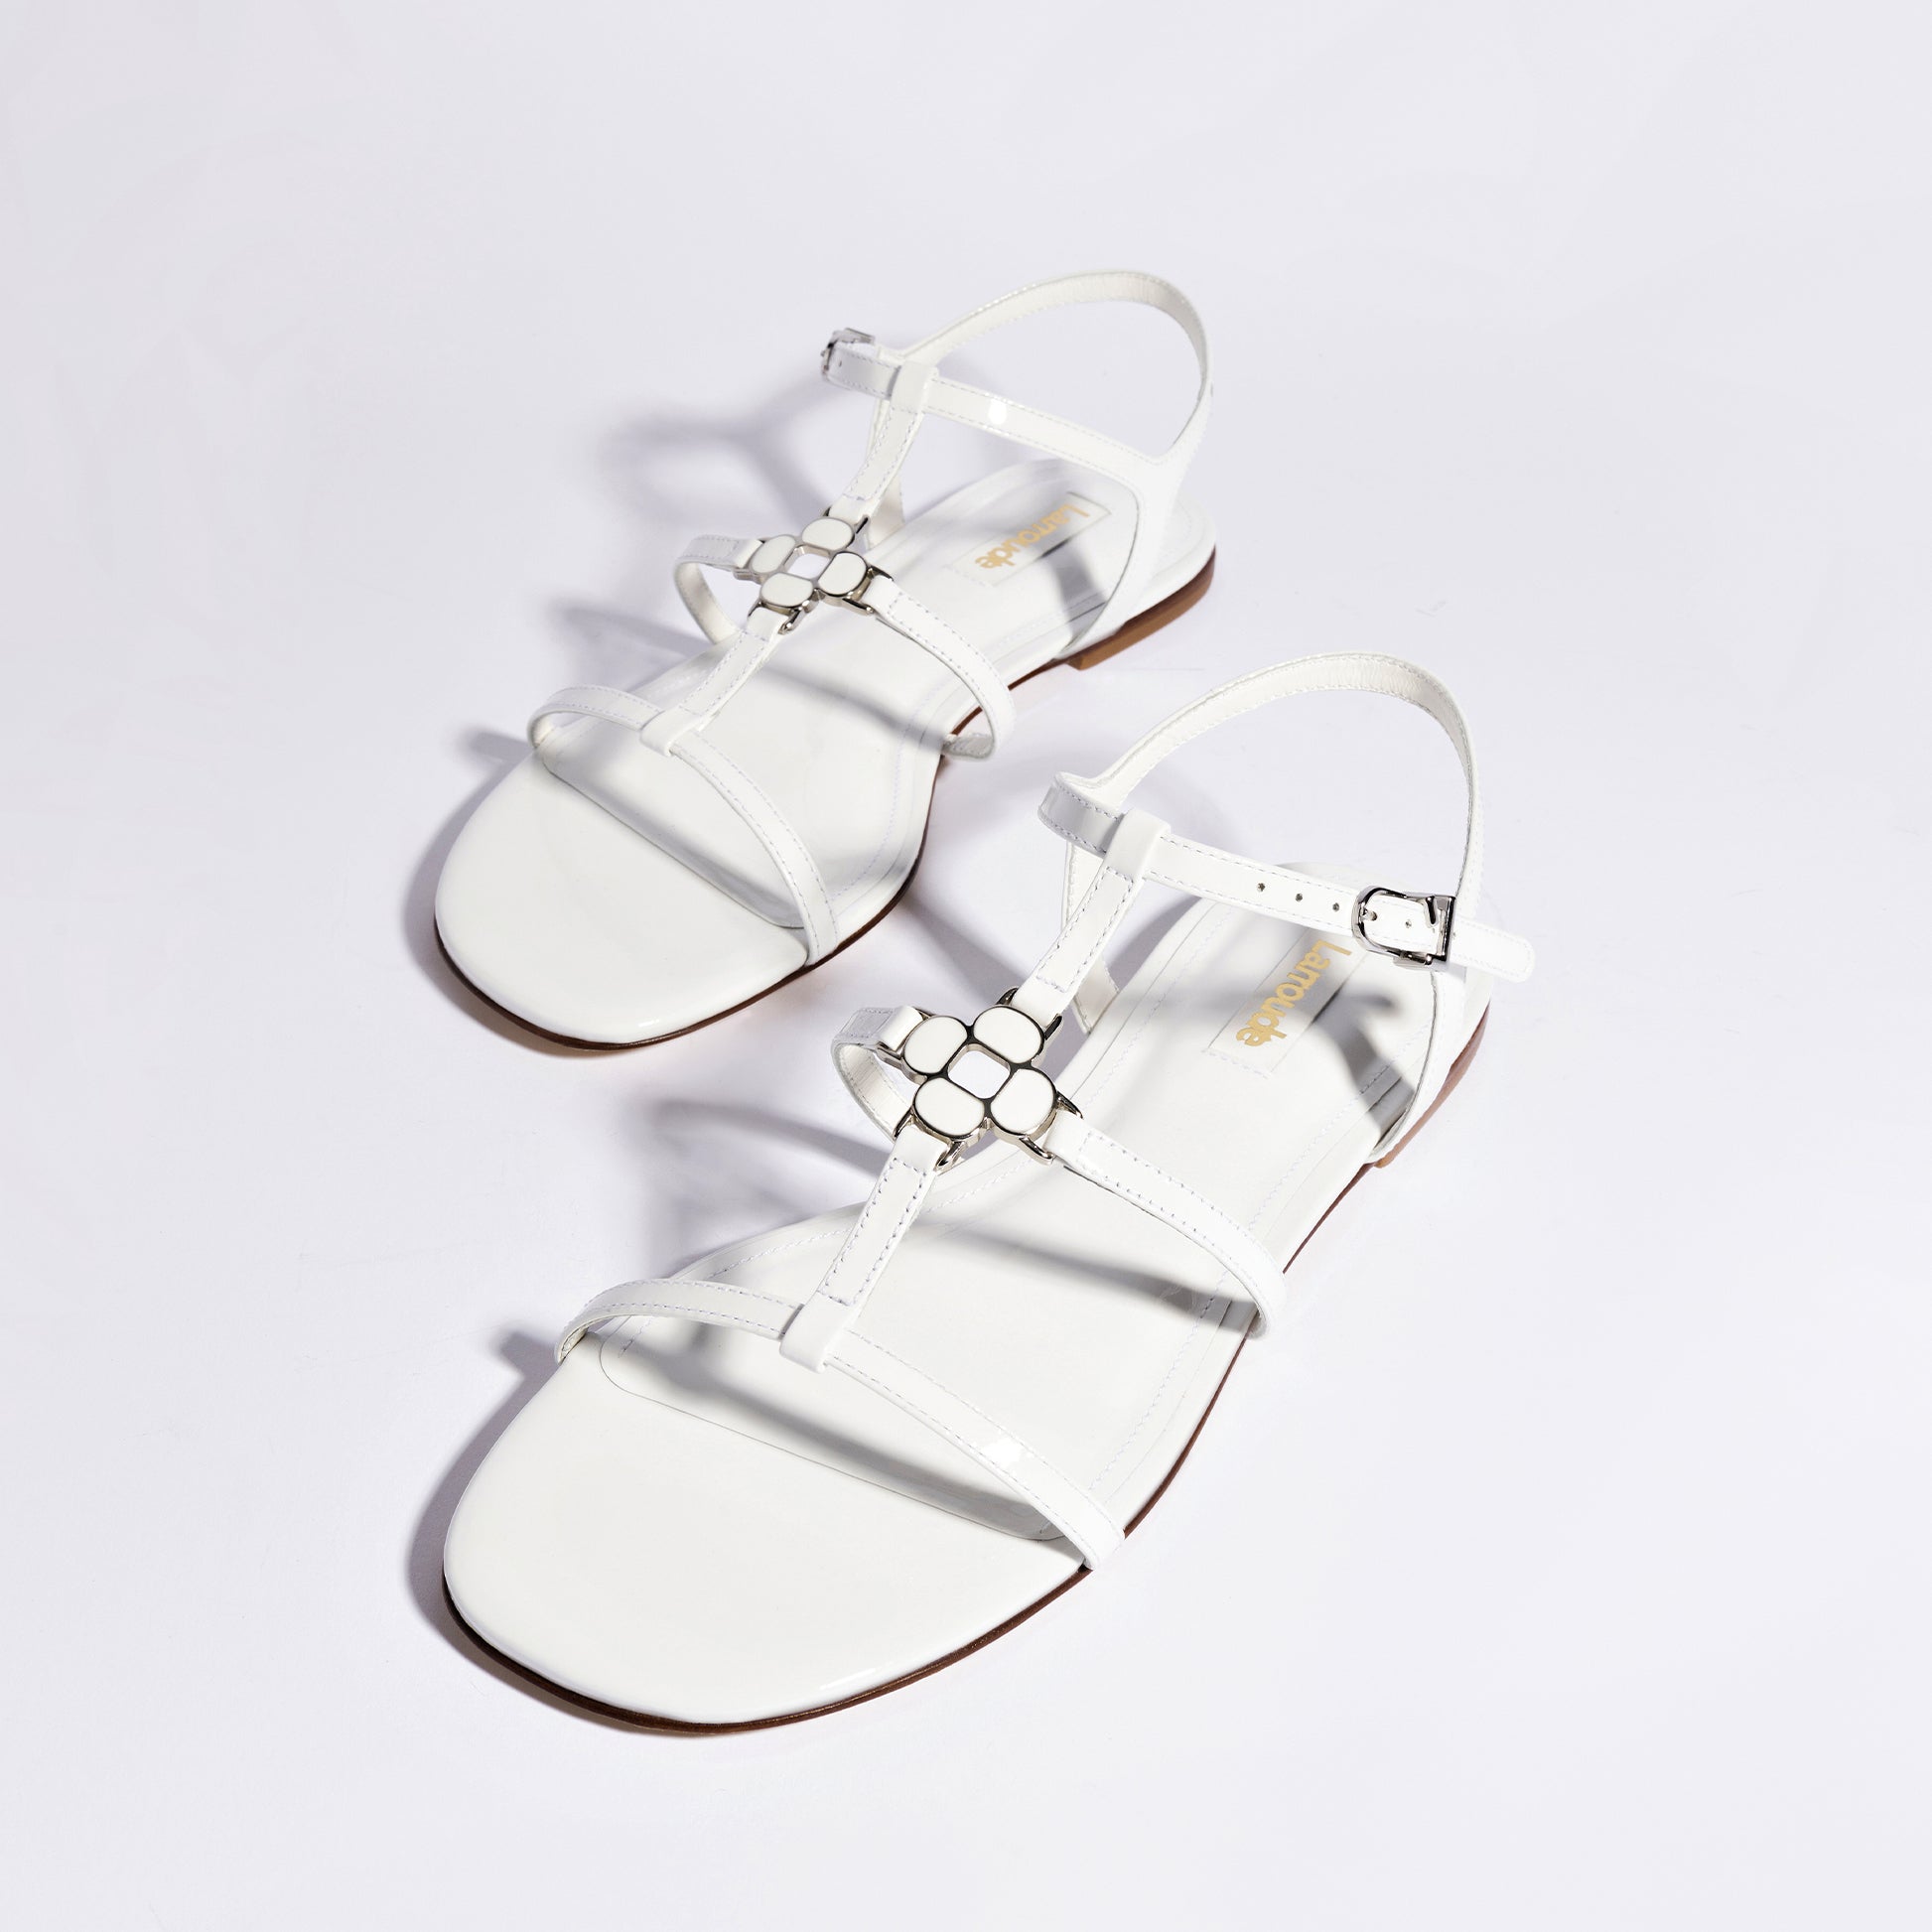 Hana Flat In White Patent Leather